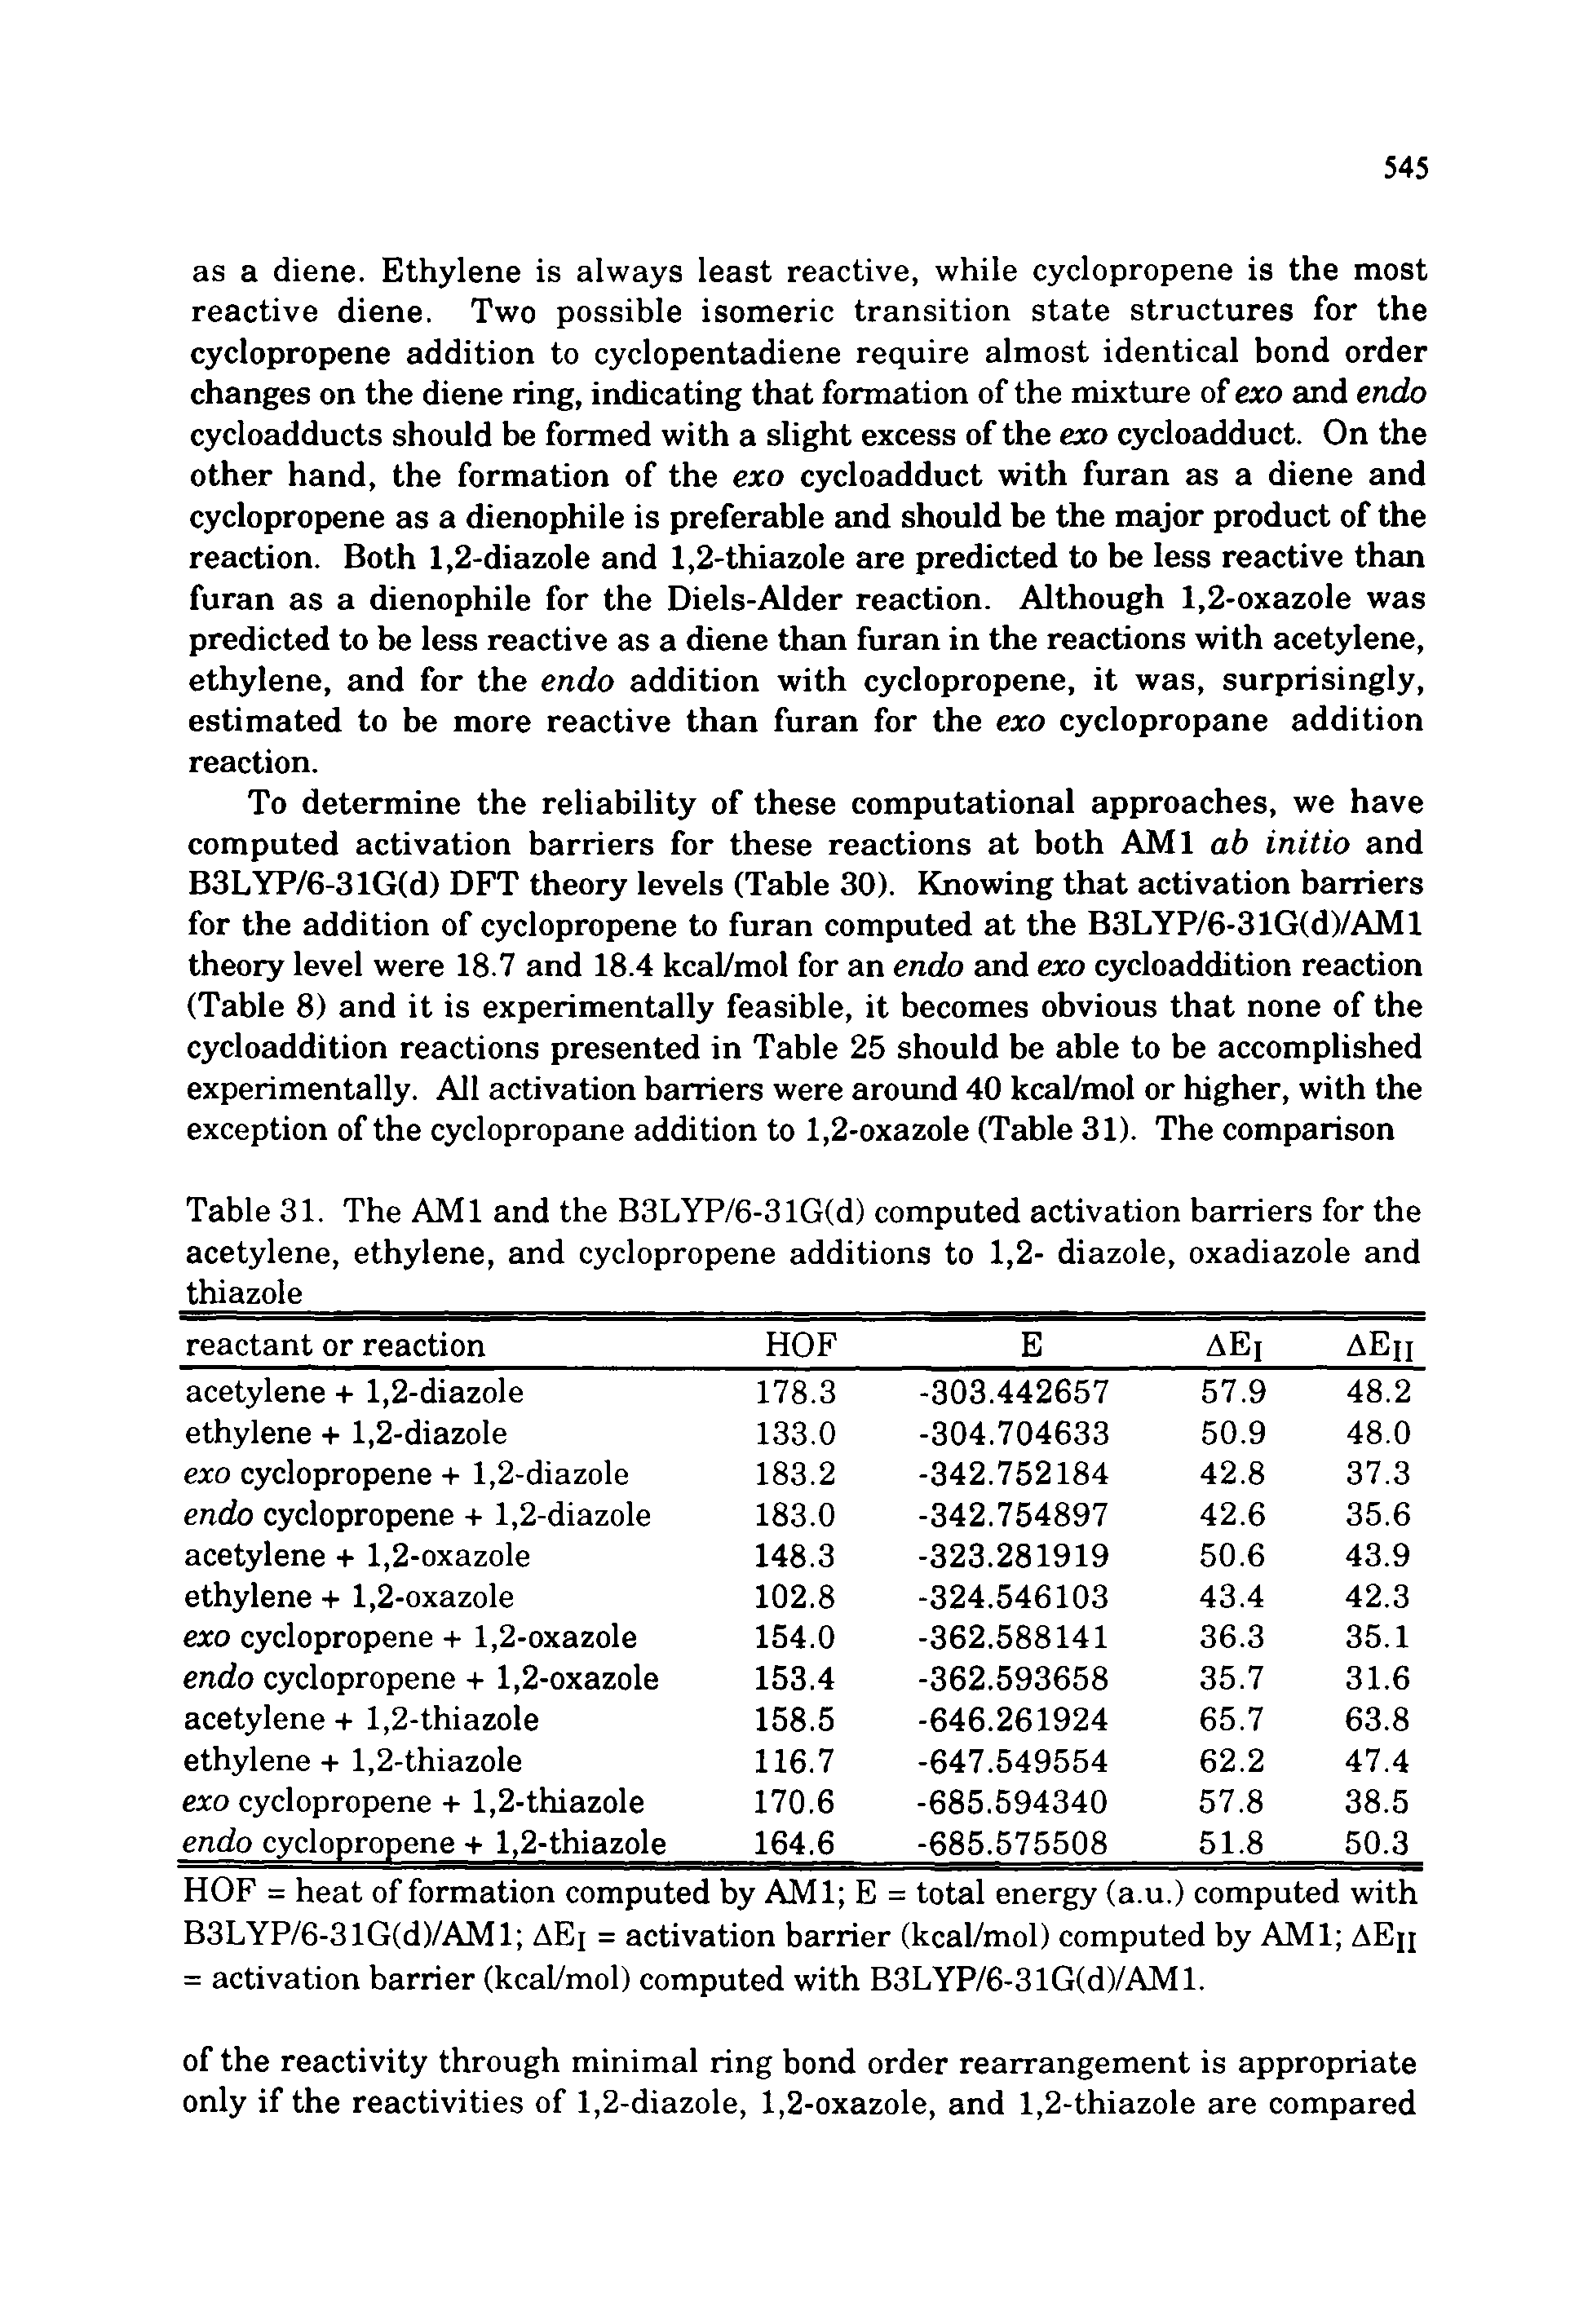 Table 31. The AMI and the B3LYP/6-31G(d) computed activation barriers for the acetylene, ethylene, and cyclopropene additions to 1,2- diazole, oxadiazole and thiazole...